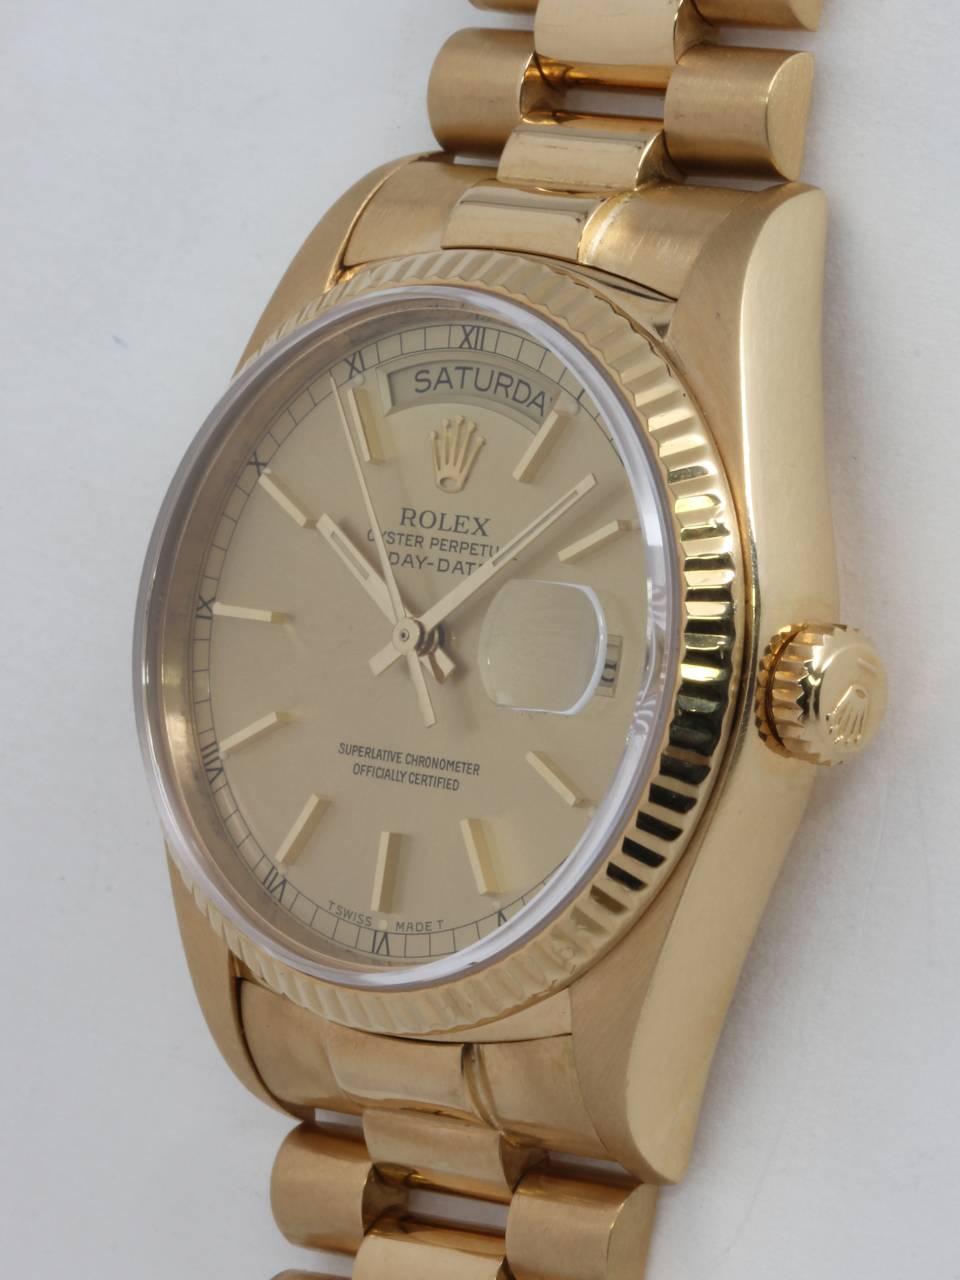 Rolex Yellow Gold Day Date President Wristwatch ref 18038 circa 1986 In Excellent Condition For Sale In West Hollywood, CA